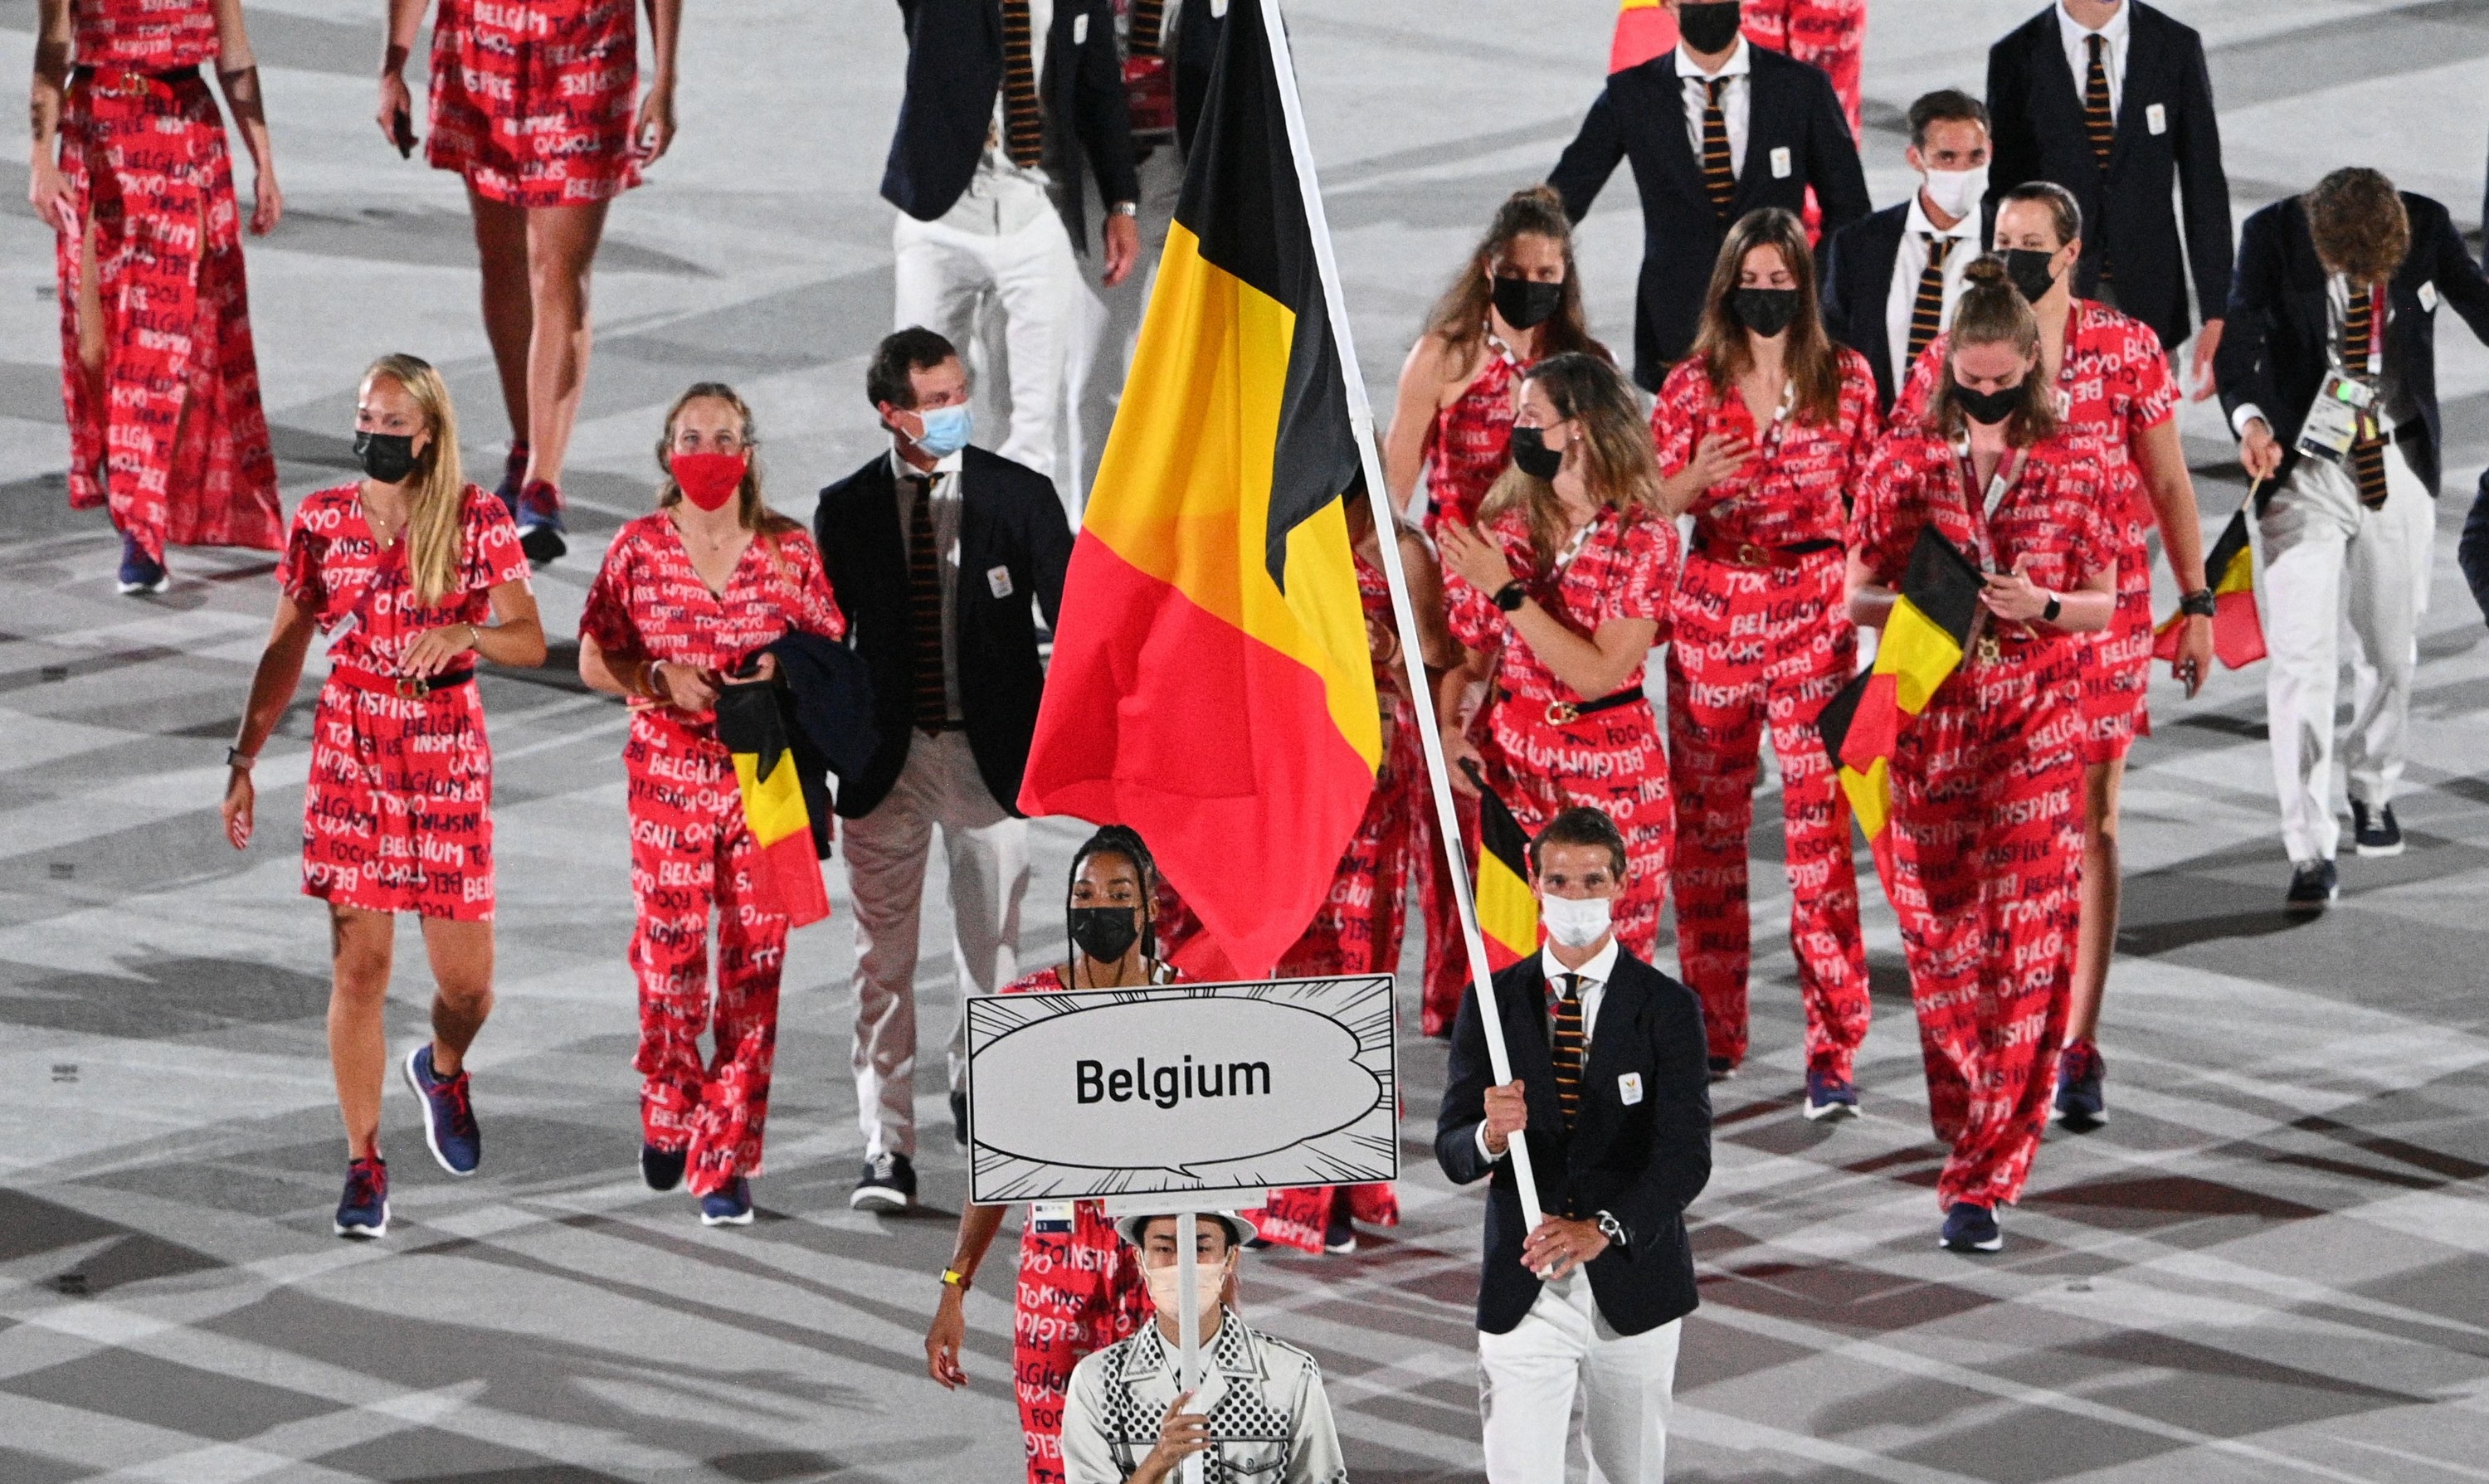 The Belgian athletes wore printed dresses or tops and loose pants